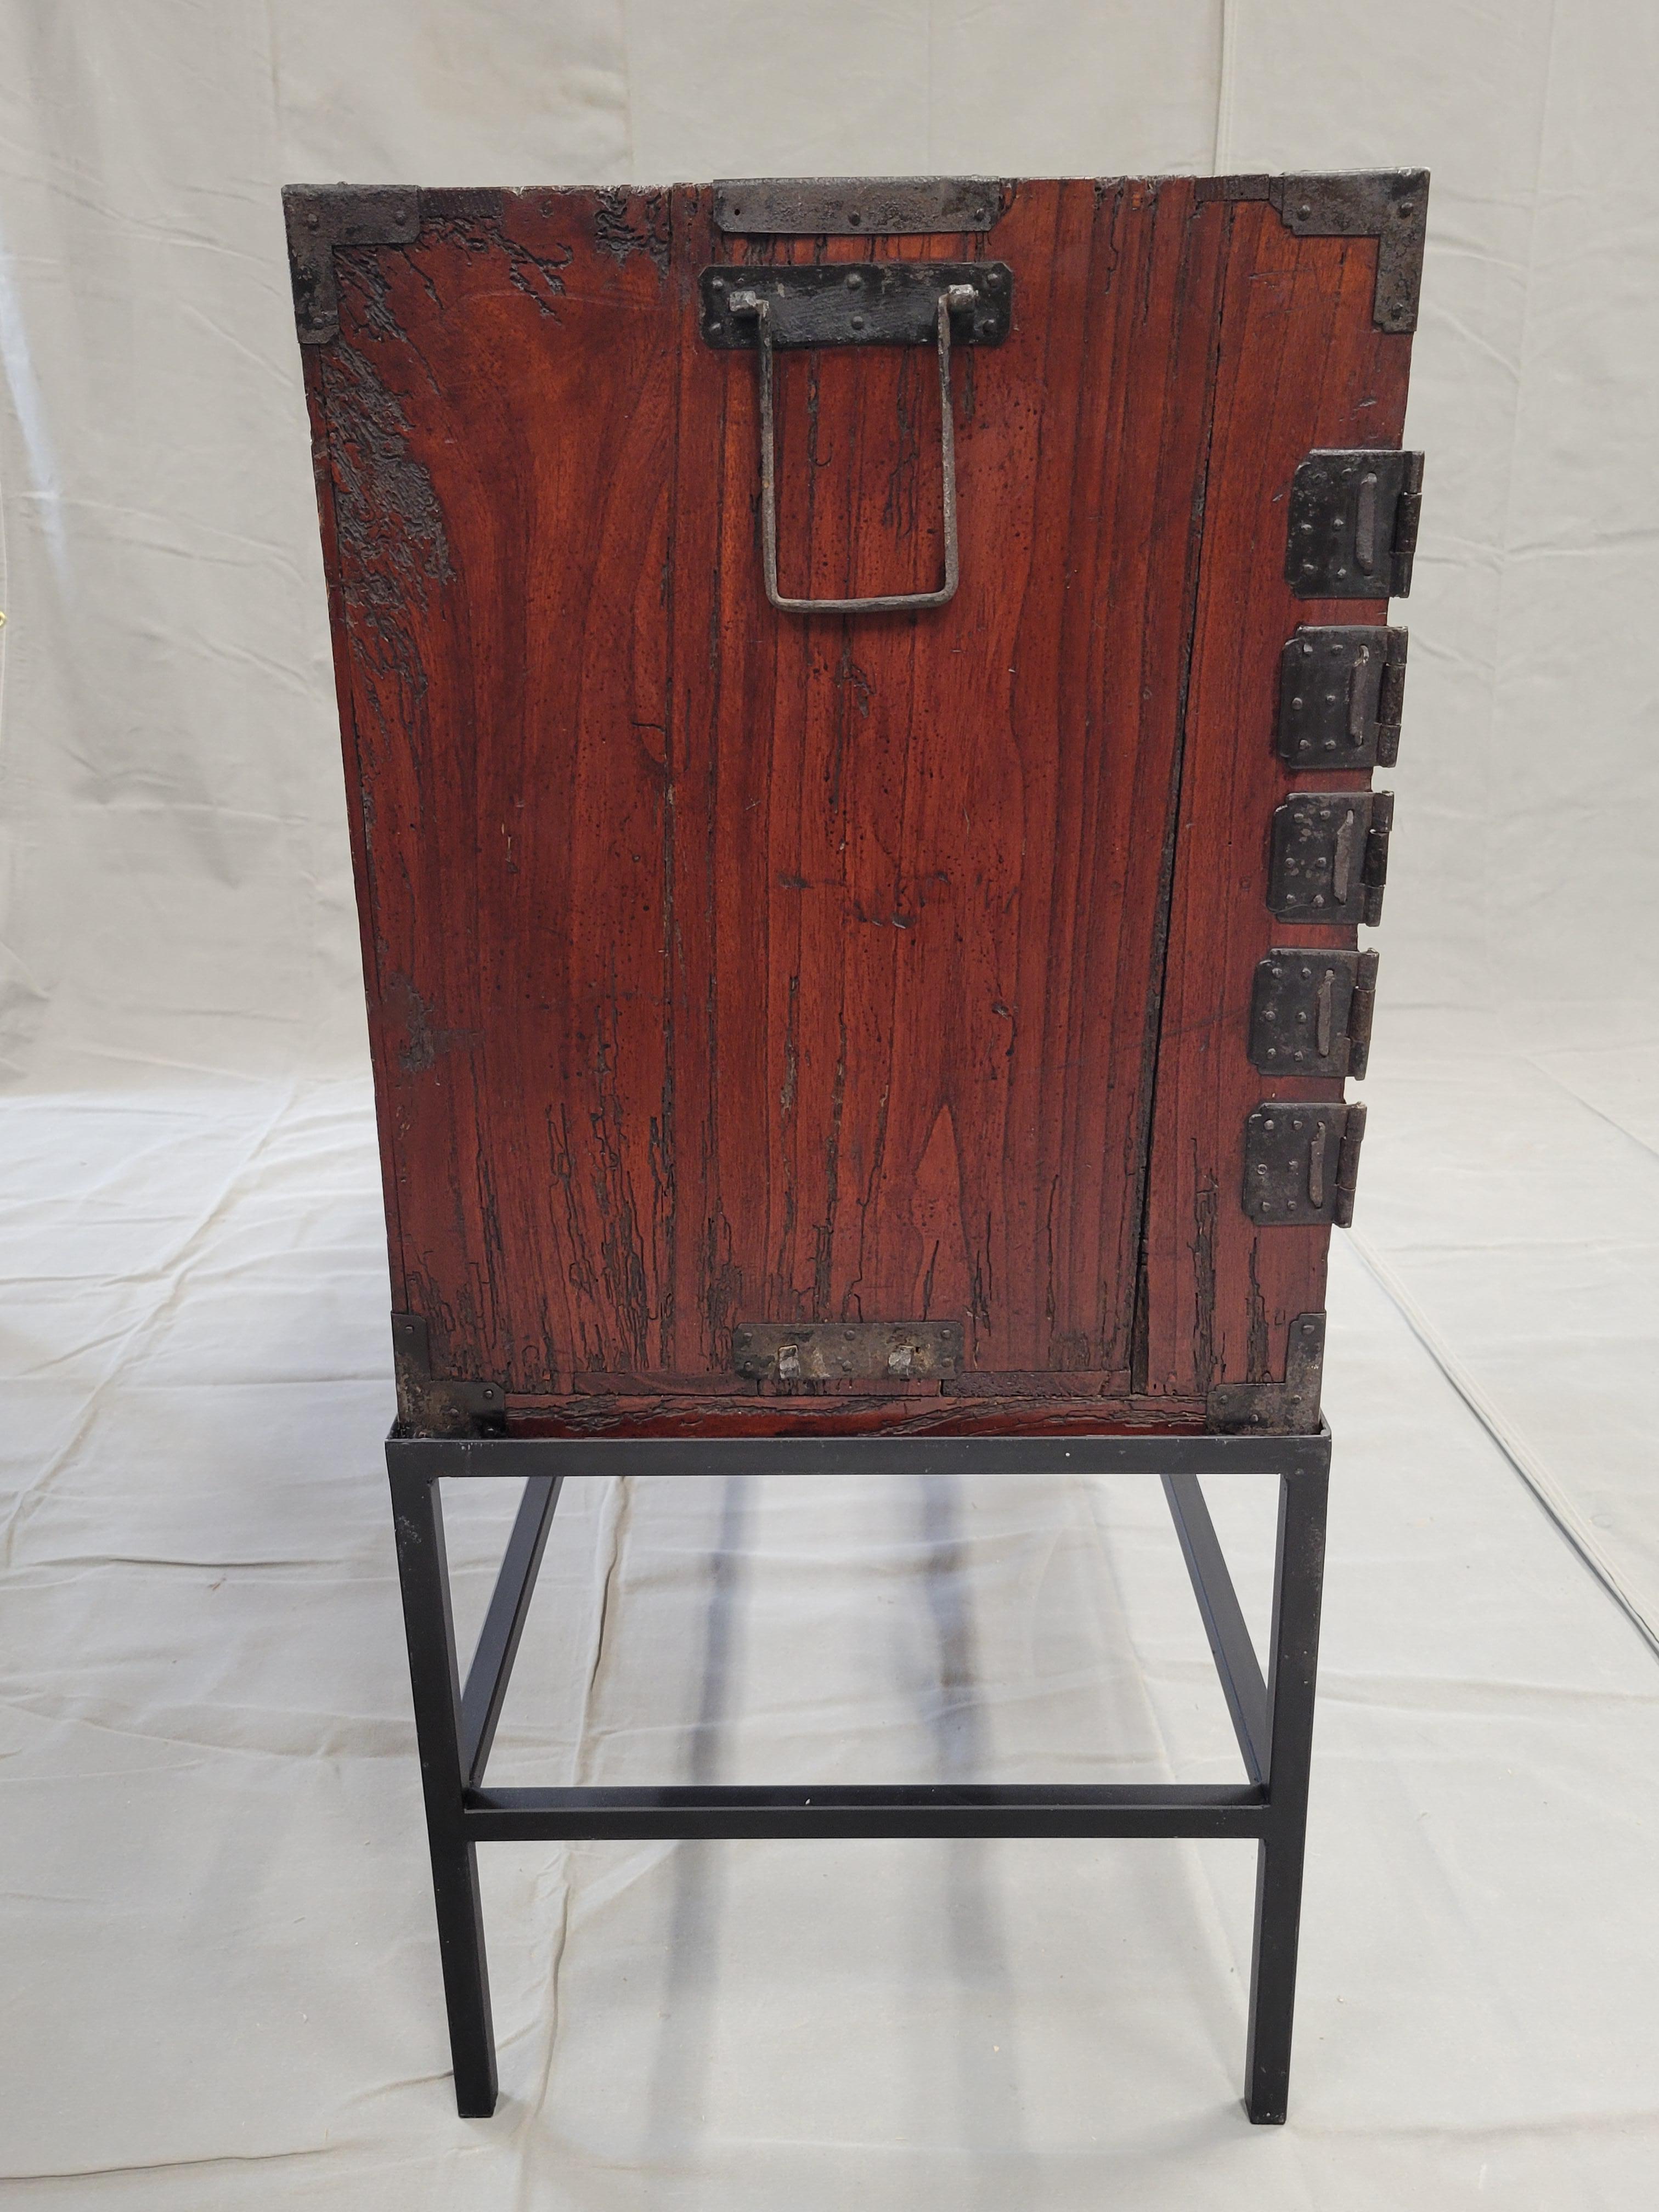 Antique Japanese Tansu Chest With Drawers on Contemporary Metal Stand Console For Sale 4